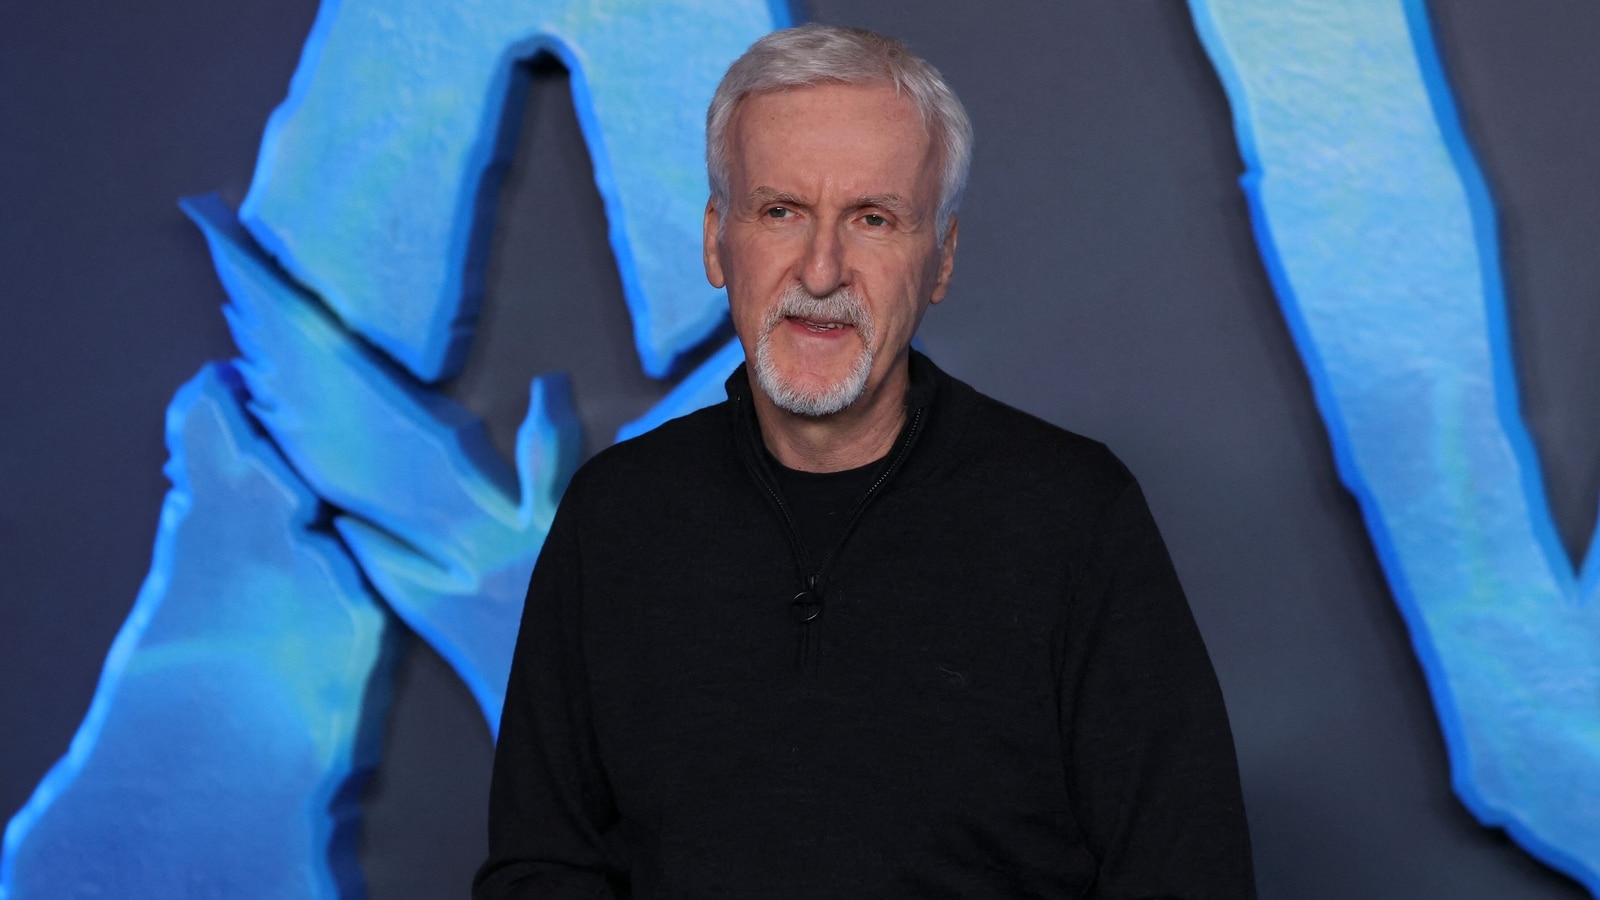 James Cameron on watching Avatar The Way of Water on phone: ‘You’re sort of missing the point’